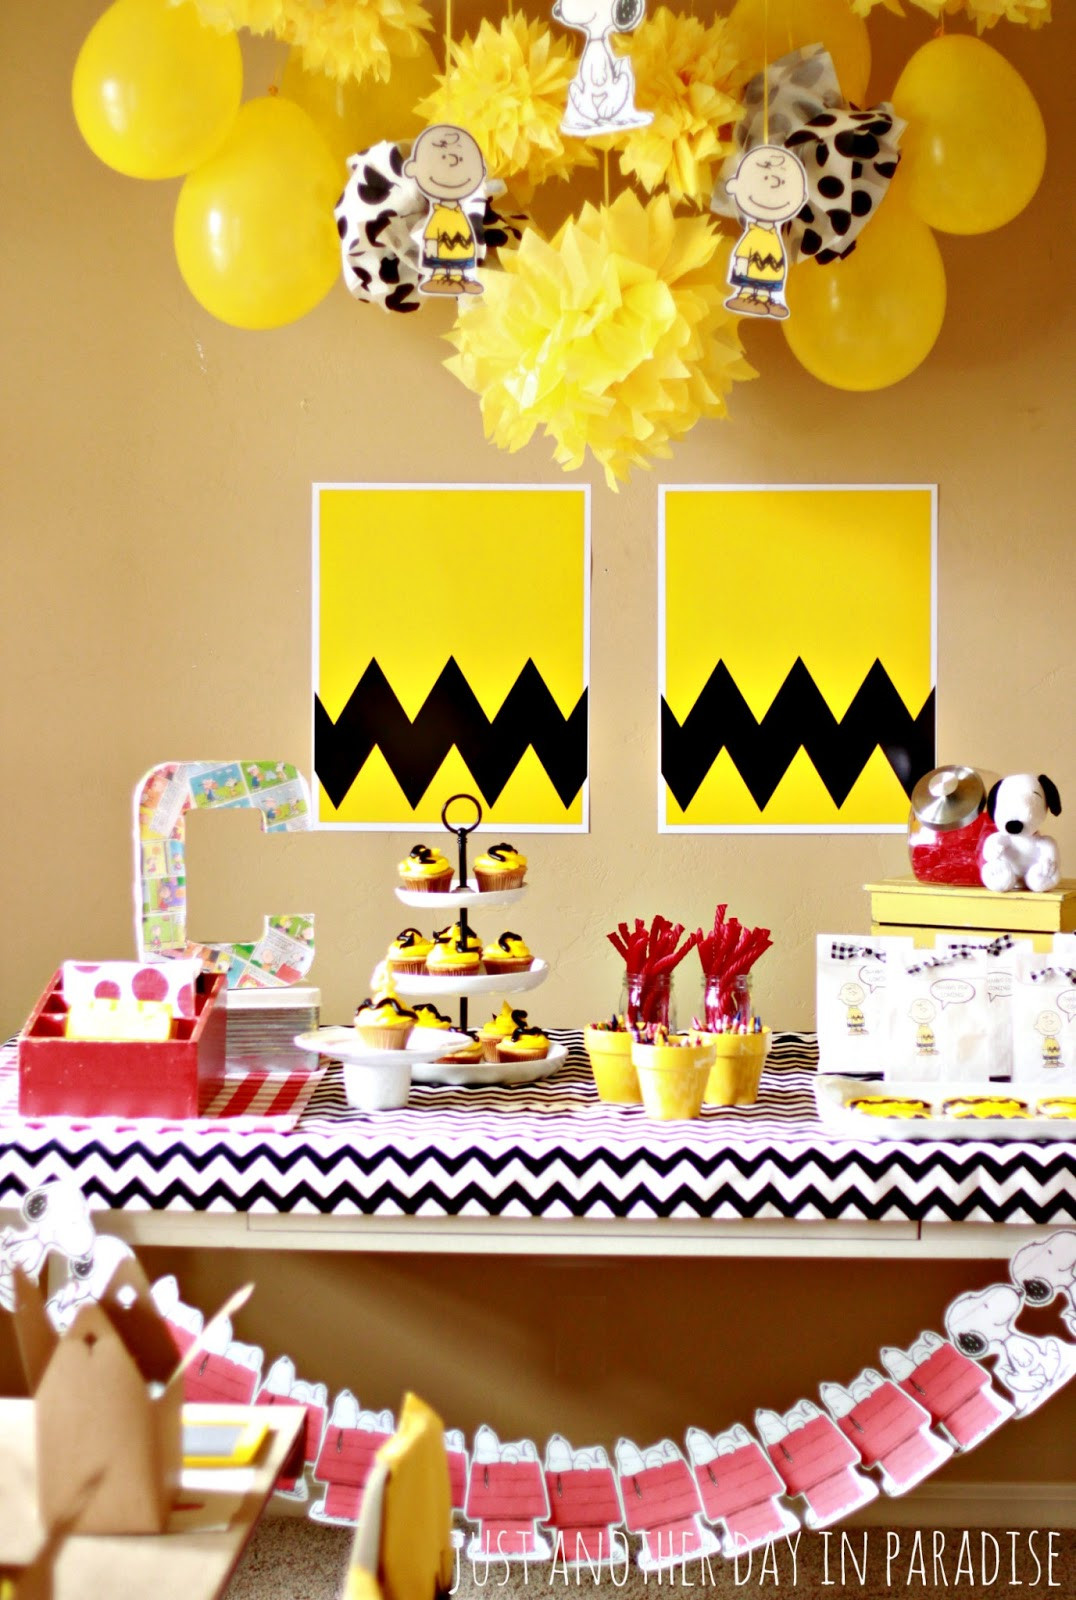 Charlie Brown Christmas Party Ideas
 Larissa Another Day A Charlie Brown Birthday Party